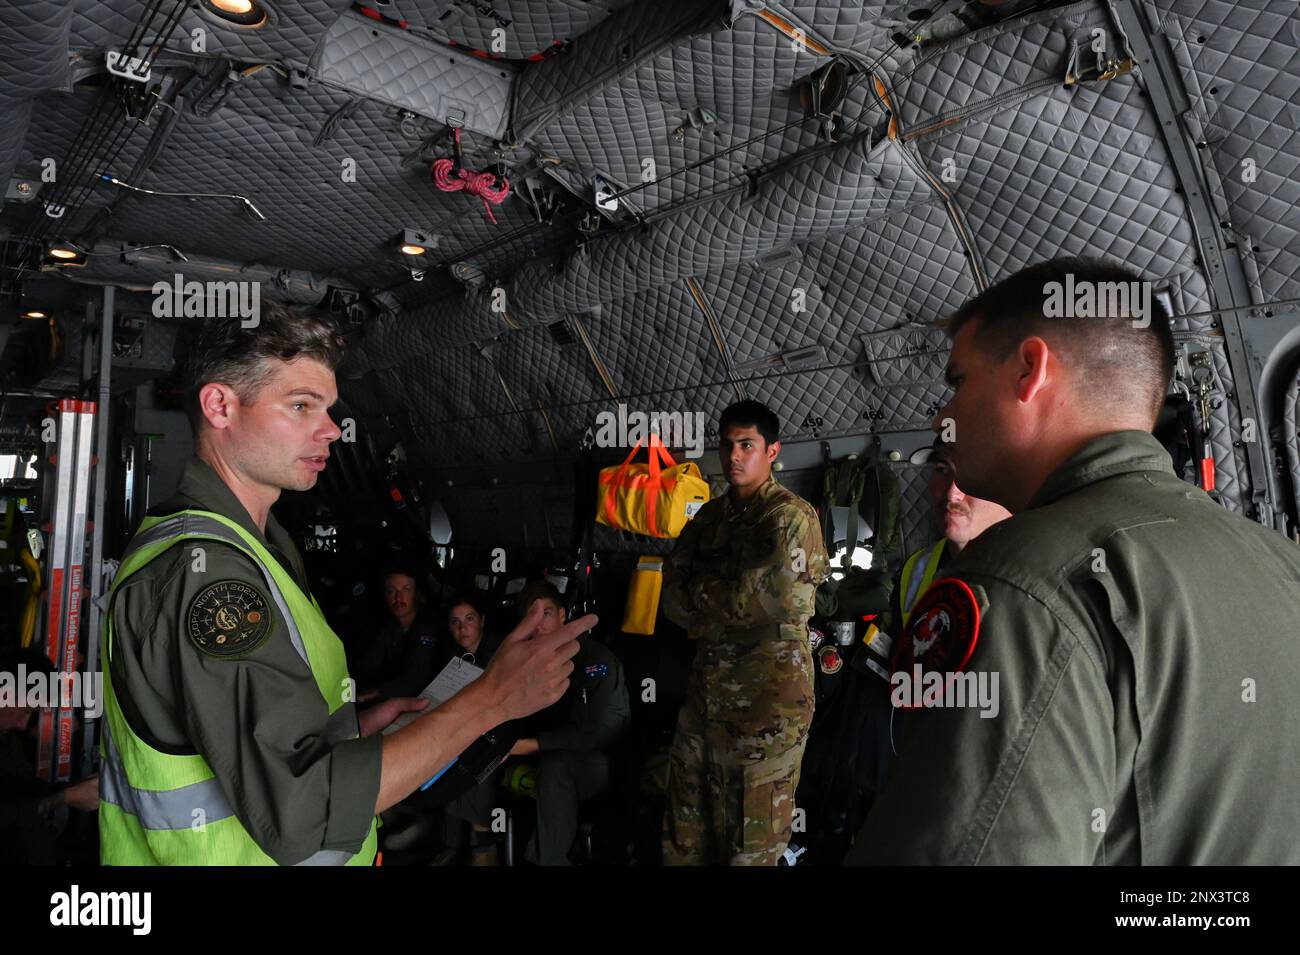 Royal Australian Air Force C-27J Spartan Aircraft Flight Lieutenant Ben Calaman, briefs a Search and Rescue mission with a U.S. Air Force member of the 119th Operations Groupon board C-27 prior to conducting a joint Search and Rescue mission supporting the U.S. Coast Guard that took place near Andersen Air Force Base, Guam on February 12 2023. These assets were able to support search and rescue operations due to being involved in Cope North, which is a combined forces exercise that focuses on building partnerships between the RAAF, U.S. Air Force, and Japan Air Self Defense Forces to enable a Stock Photo